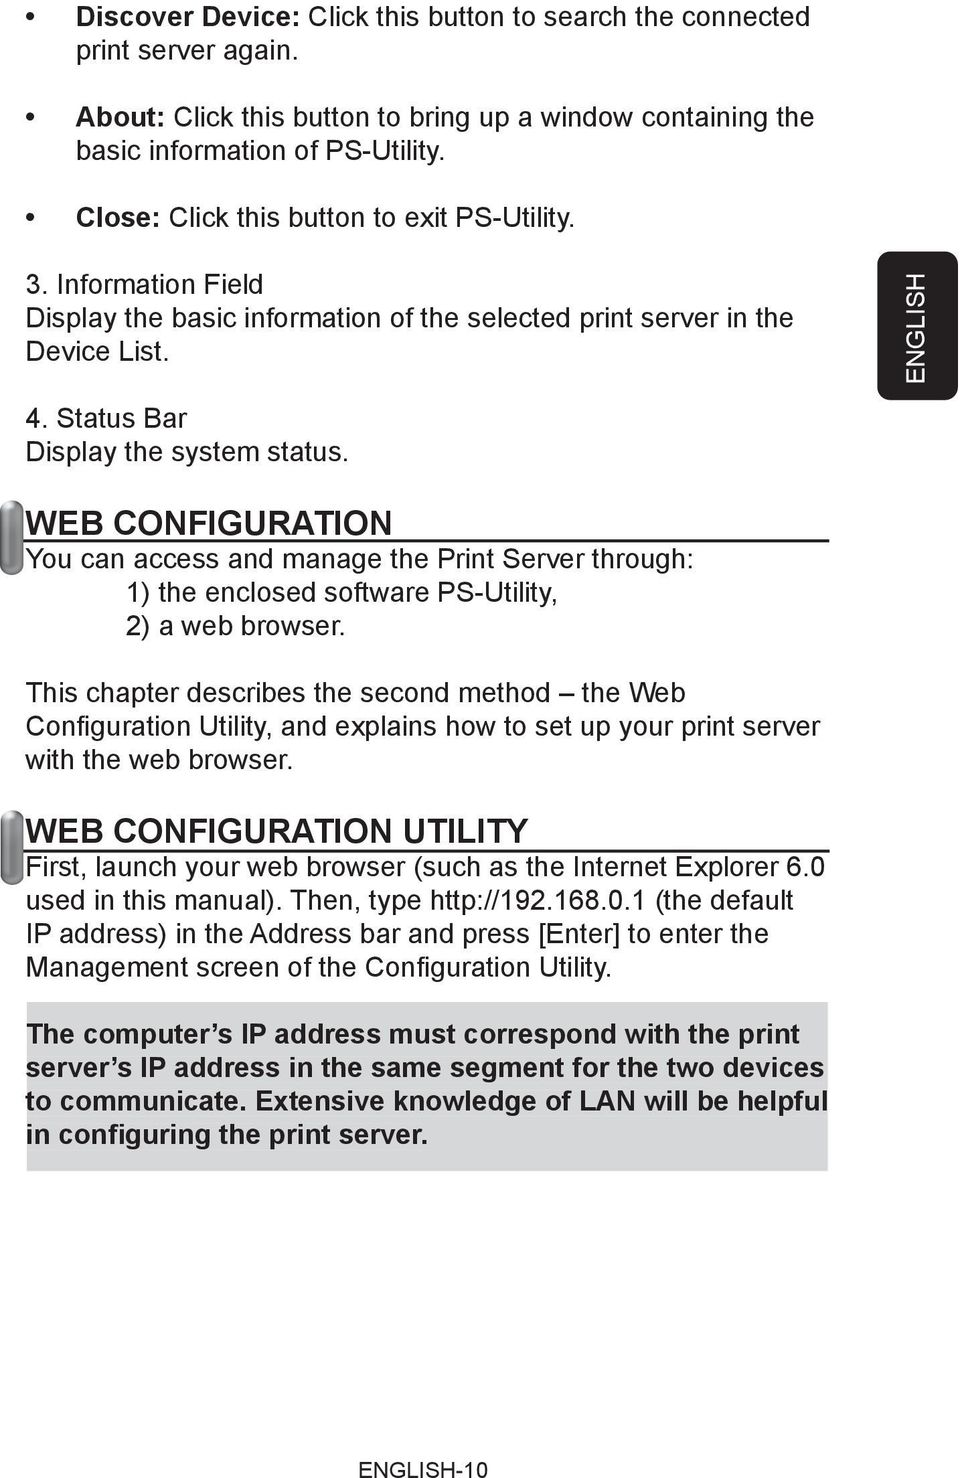 WEB CONFIGURATION You can access and manage the Print Server through: 1) the enclosed software PS-Utility, 2) a web browser.